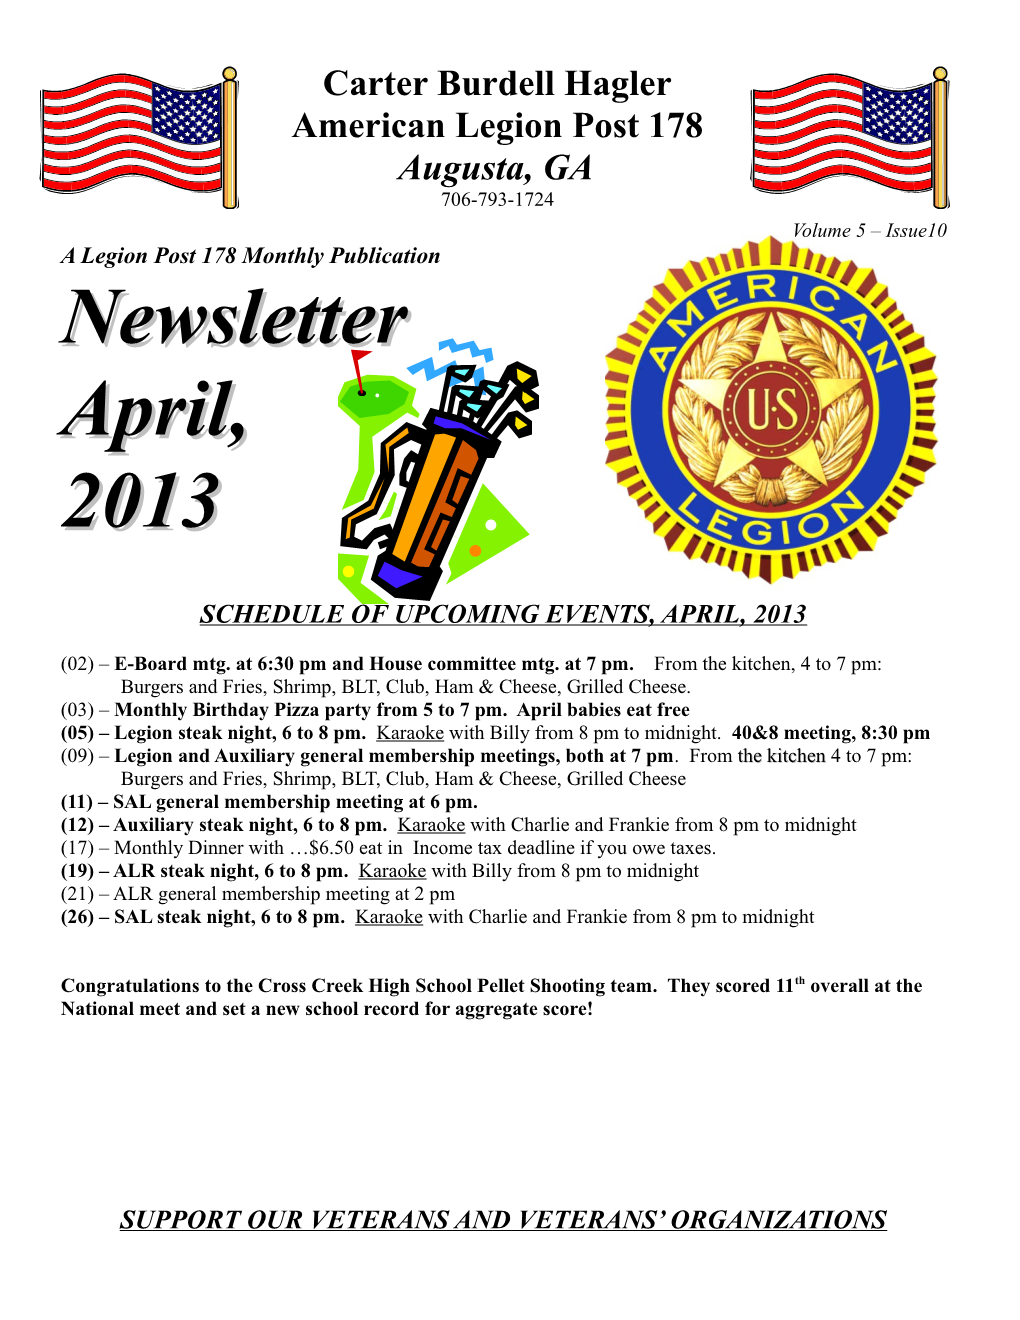 A Legion Post 178 Monthly Publication